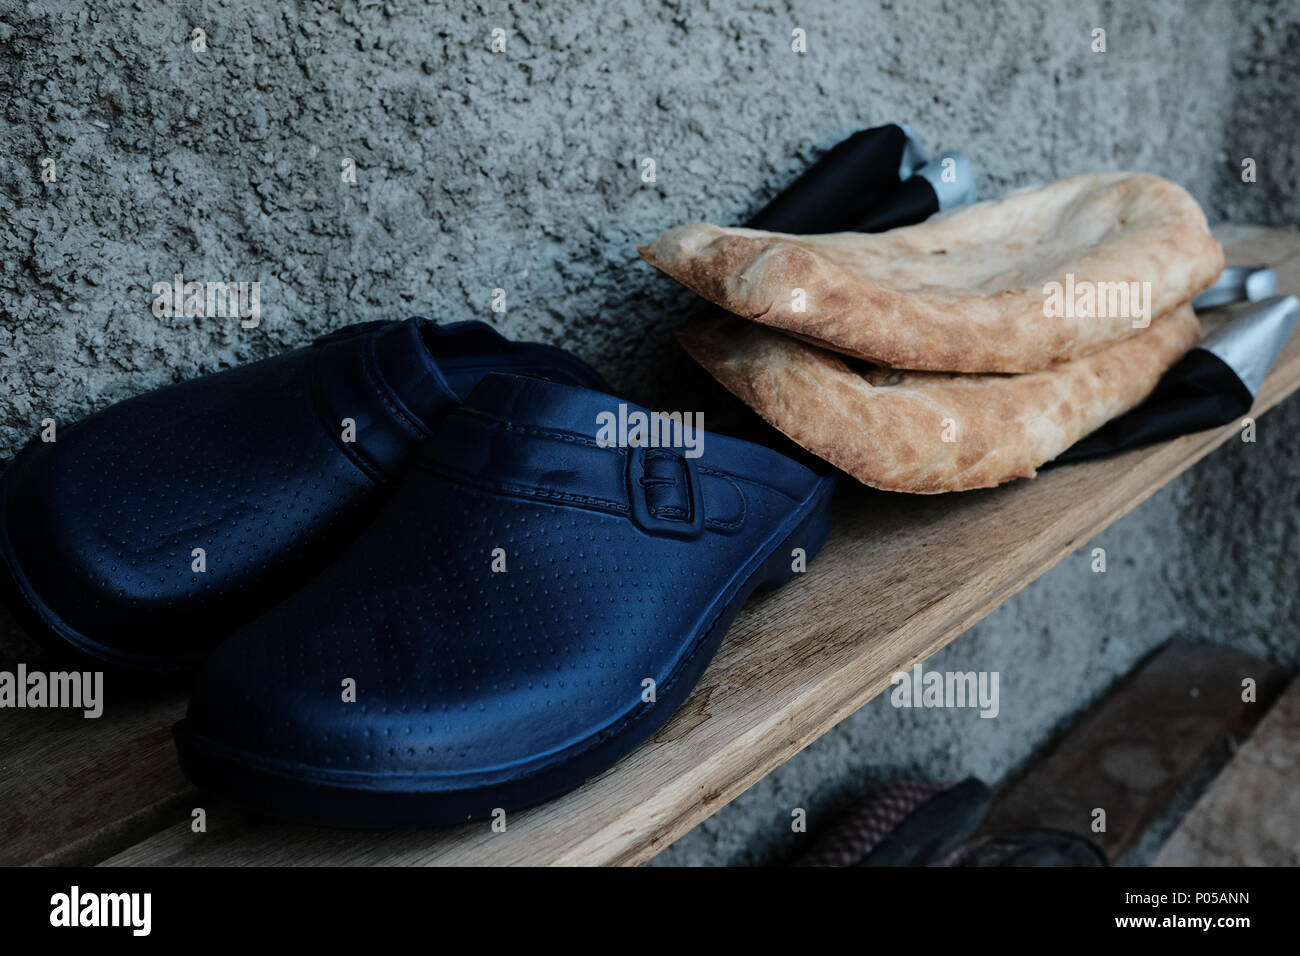 Bread and a pair of shoes share a shelf Stock Photo - Alamy